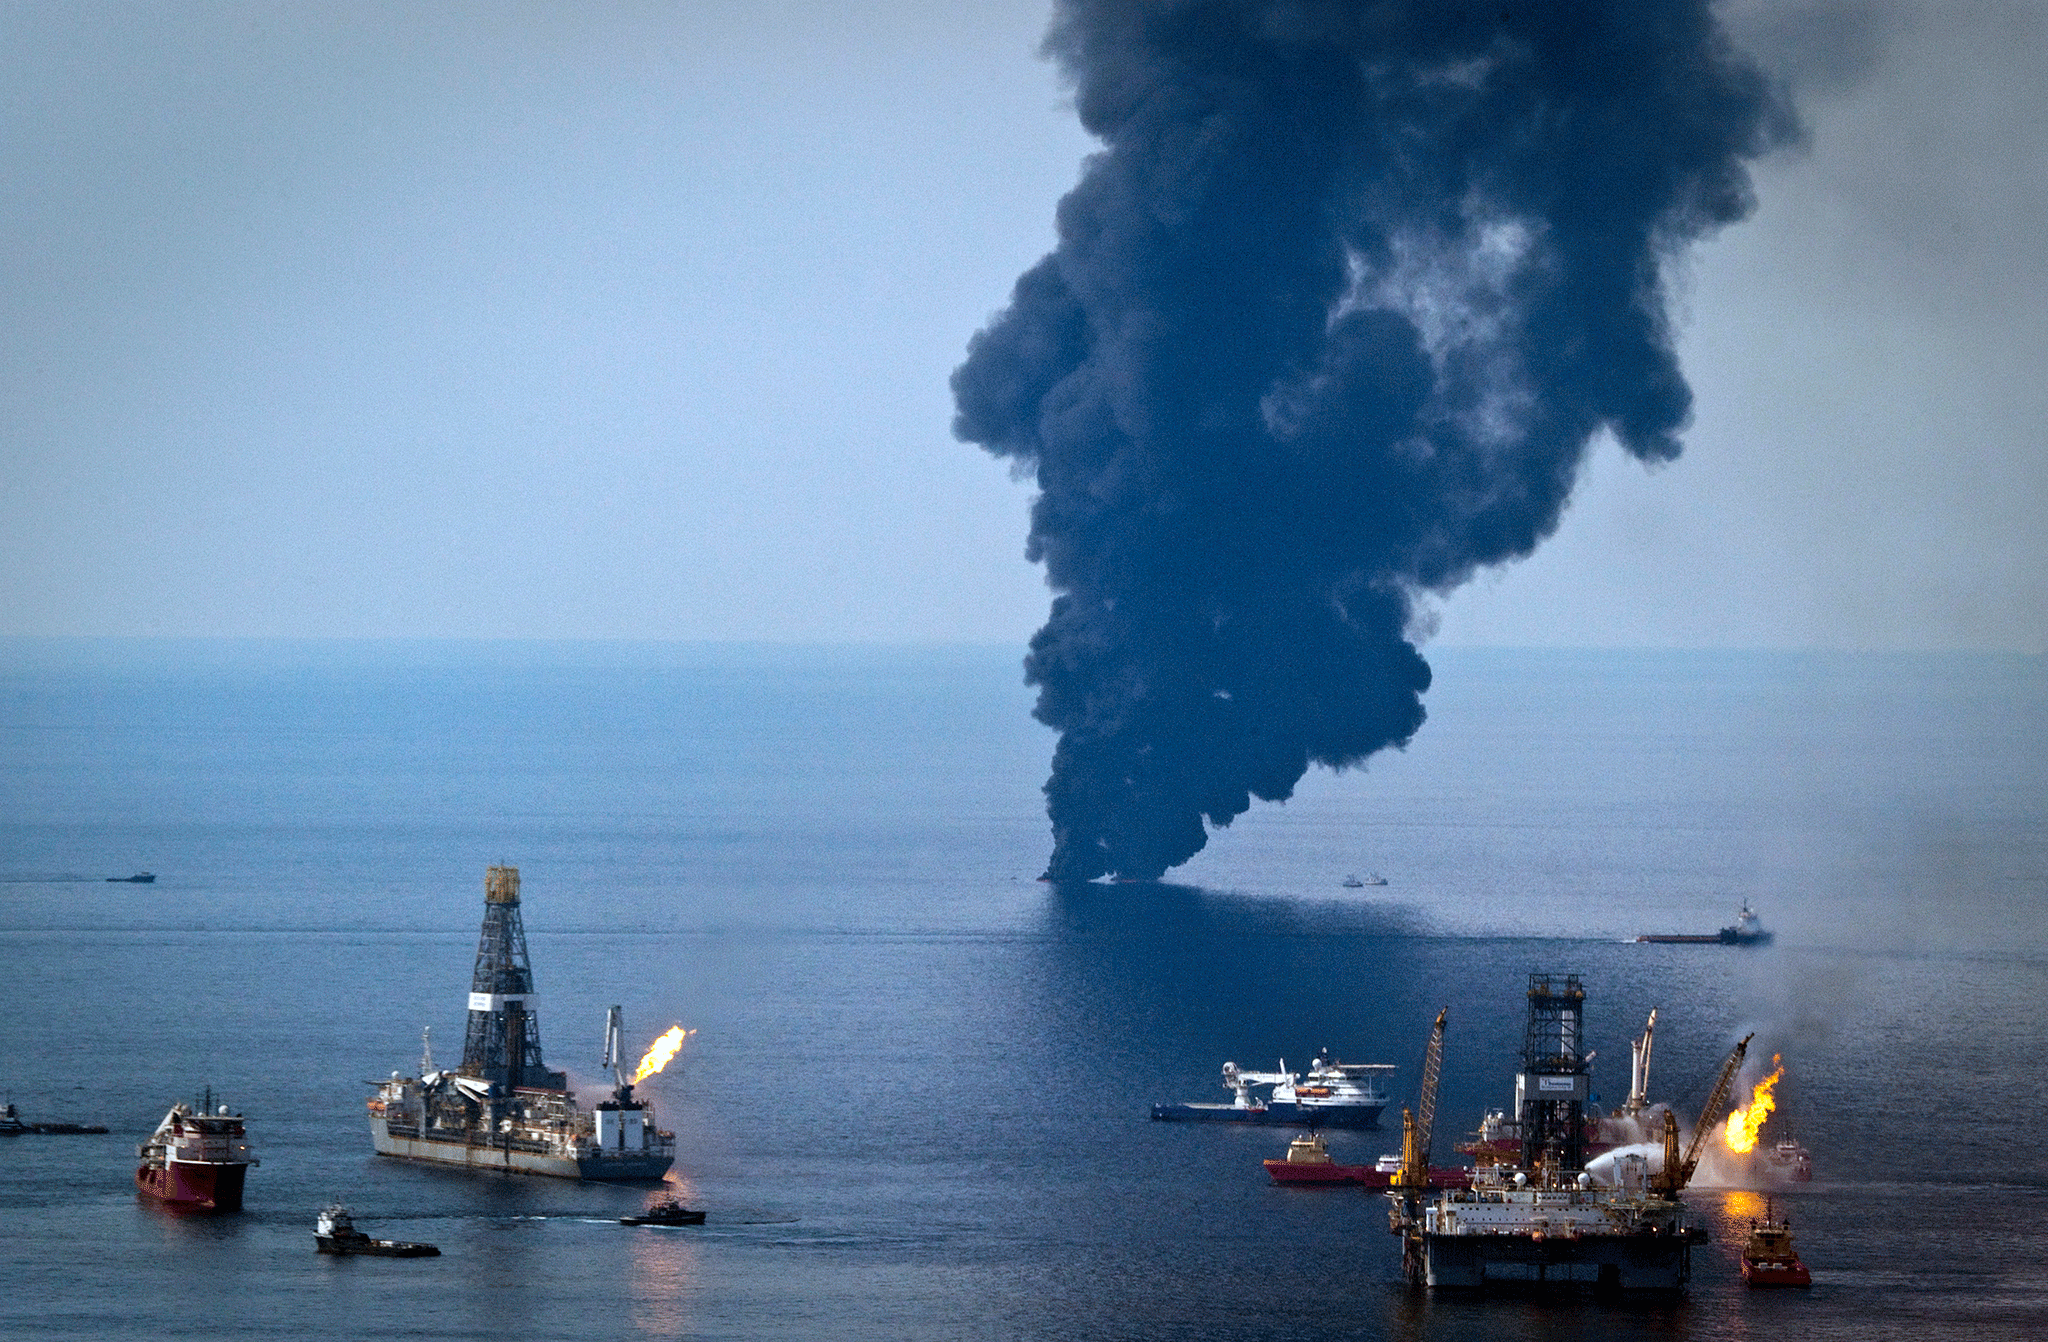 The cost of the Deepwater Horizon disaster, $61.6bn, was compared unfavourably to the amount announced to help cut emissions